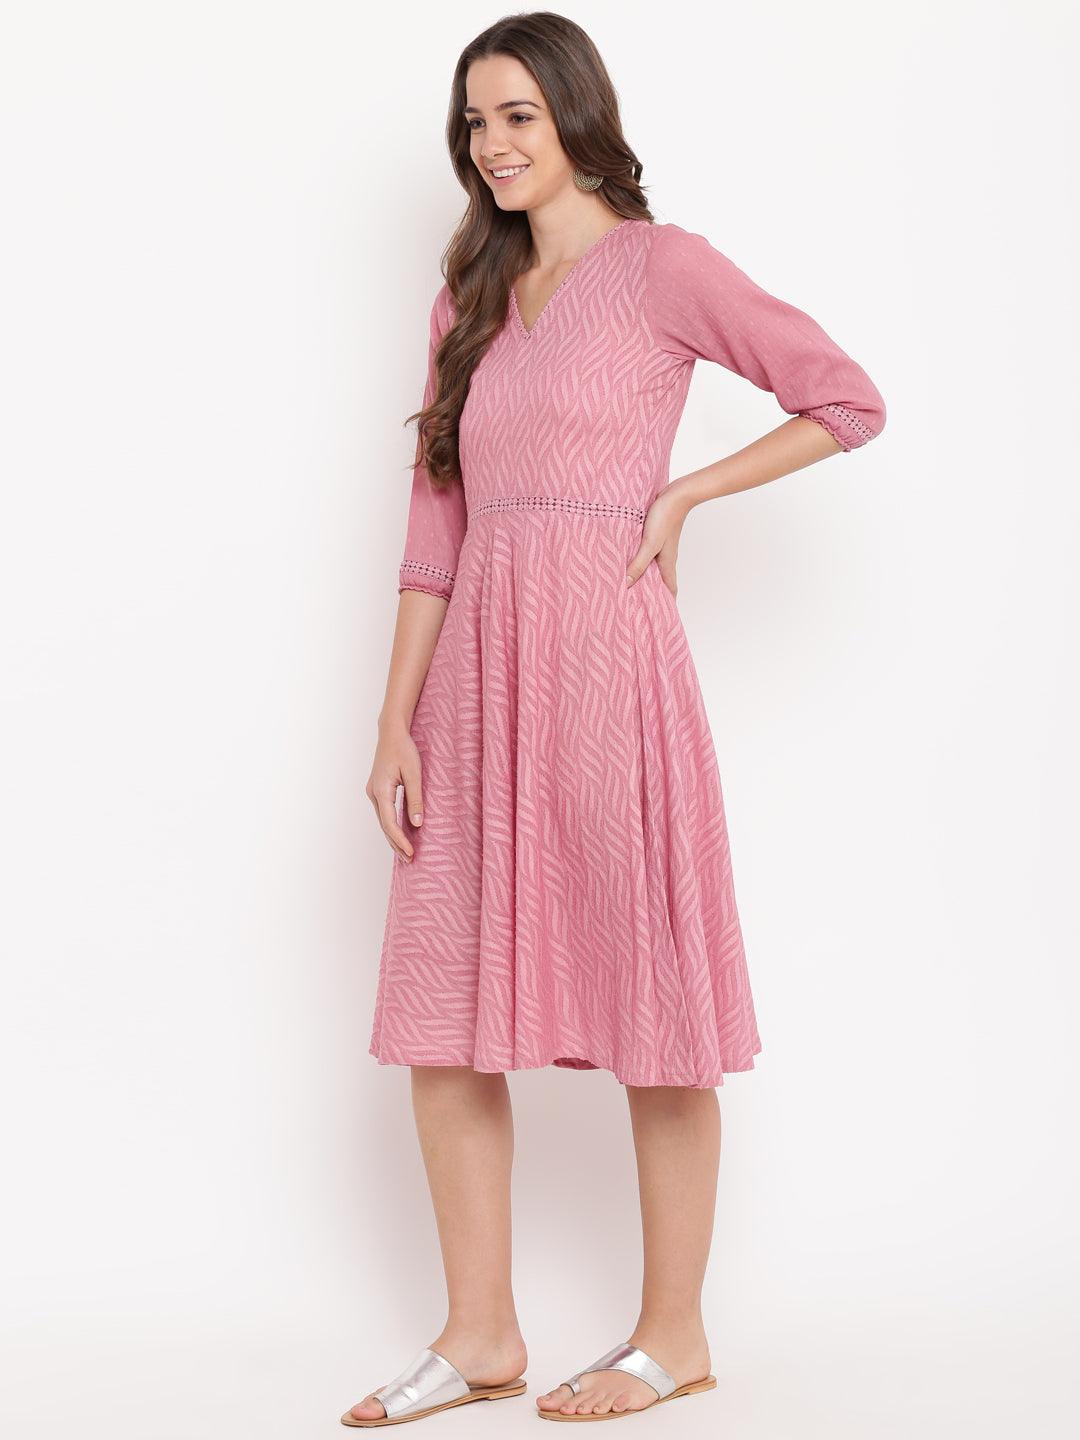 Pink Floral Dobby Lace Dress - trueBrowns